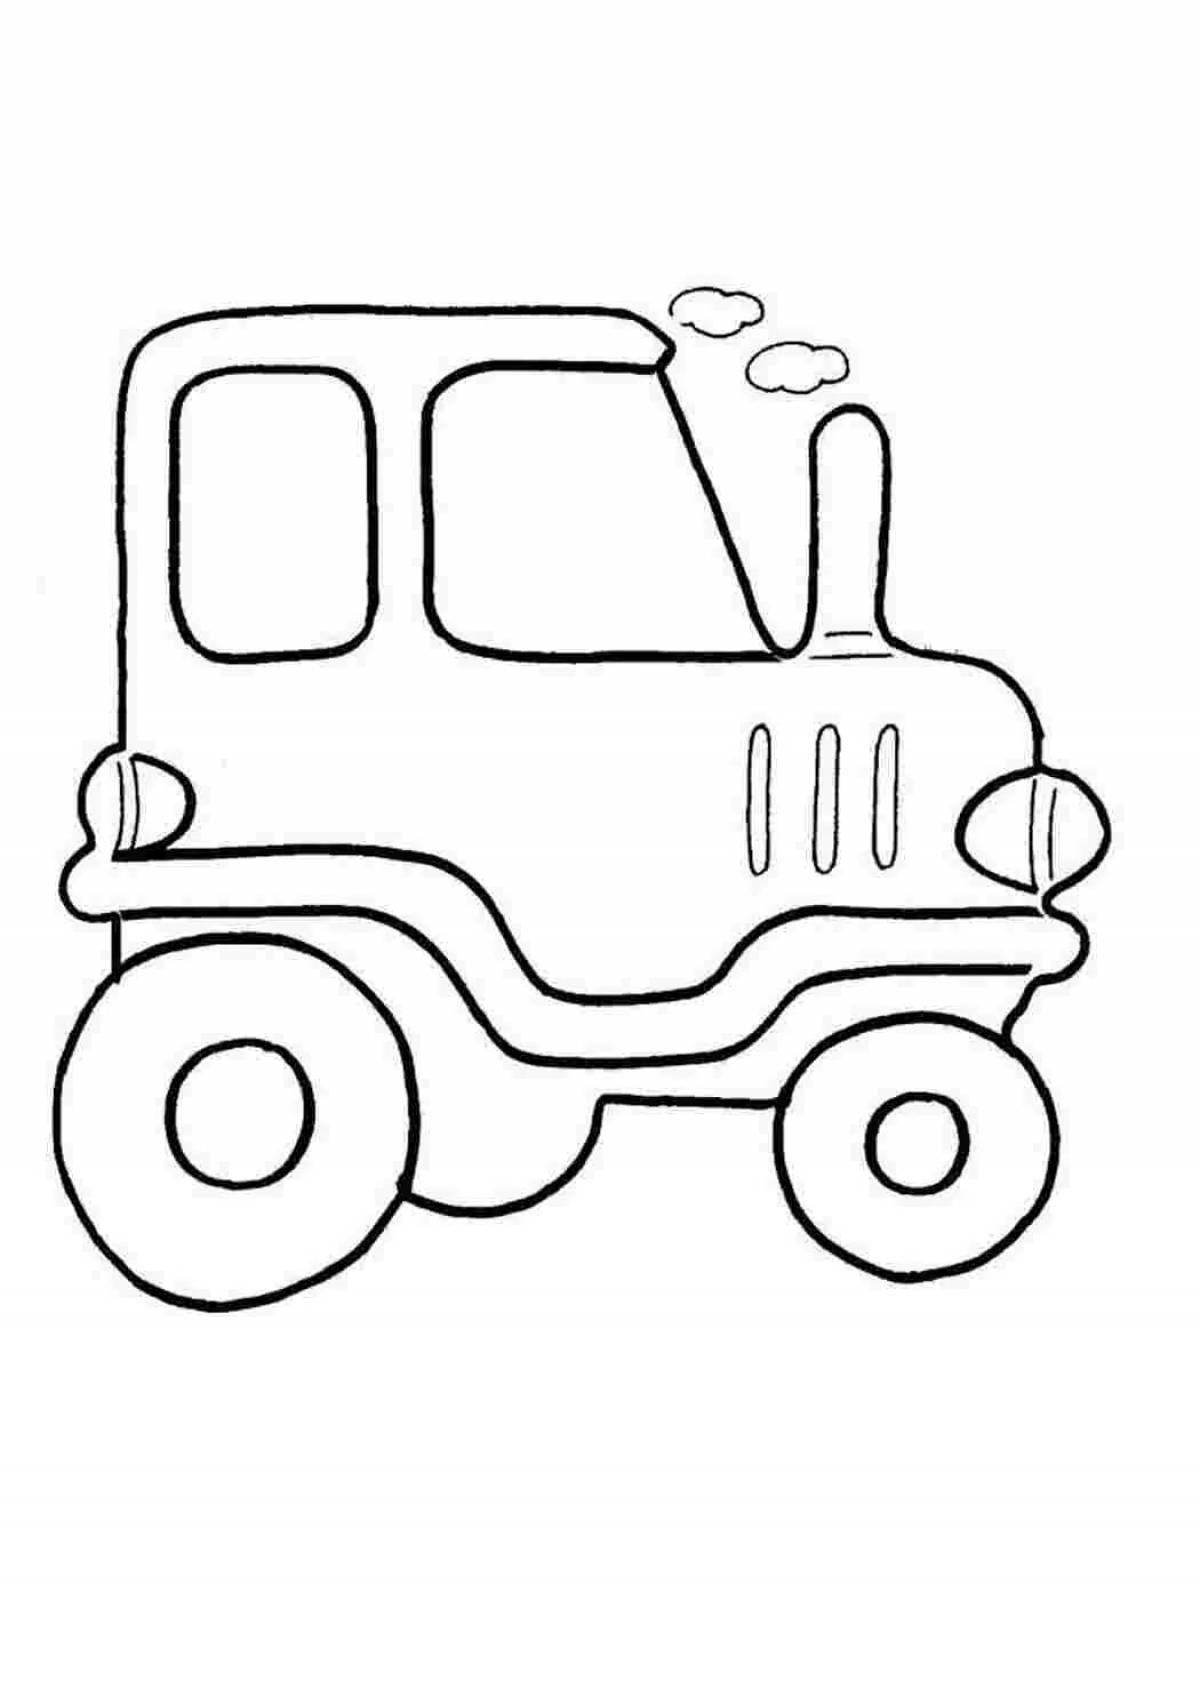 Nice transport coloring book for kids 2-3 years old